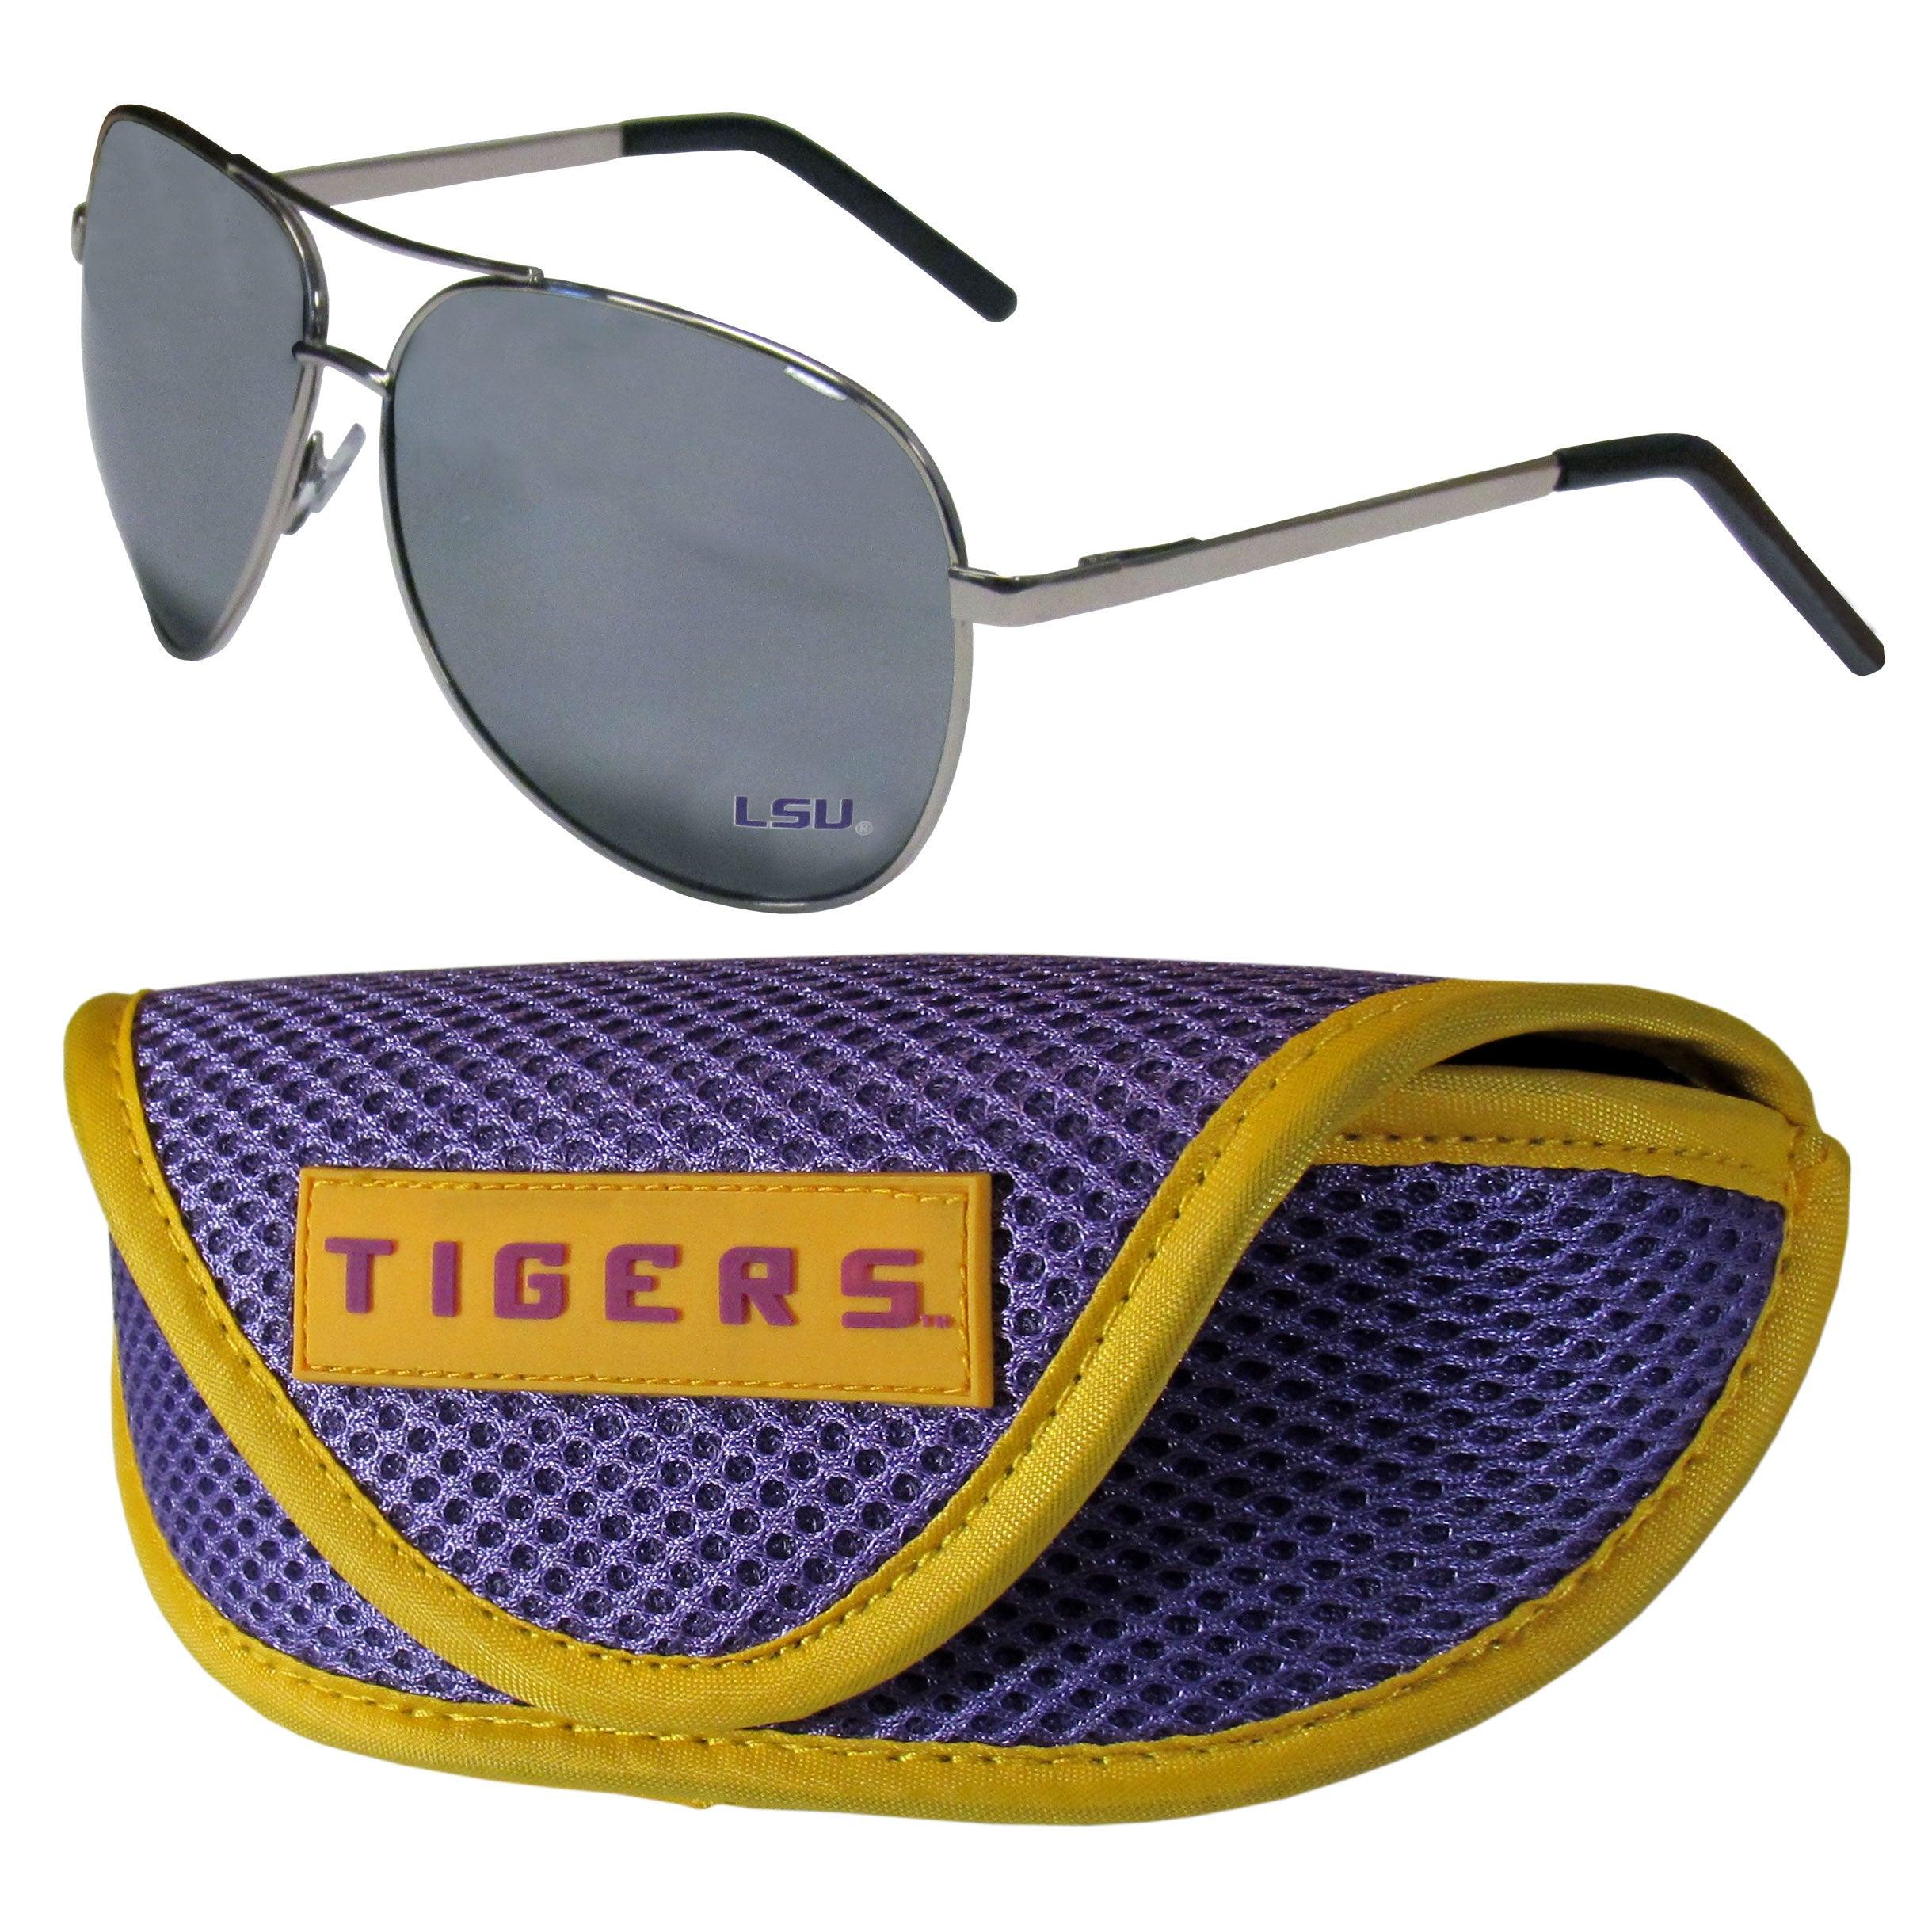 LSU Tigers Aviator Sunglasses and Sports Case - Flyclothing LLC